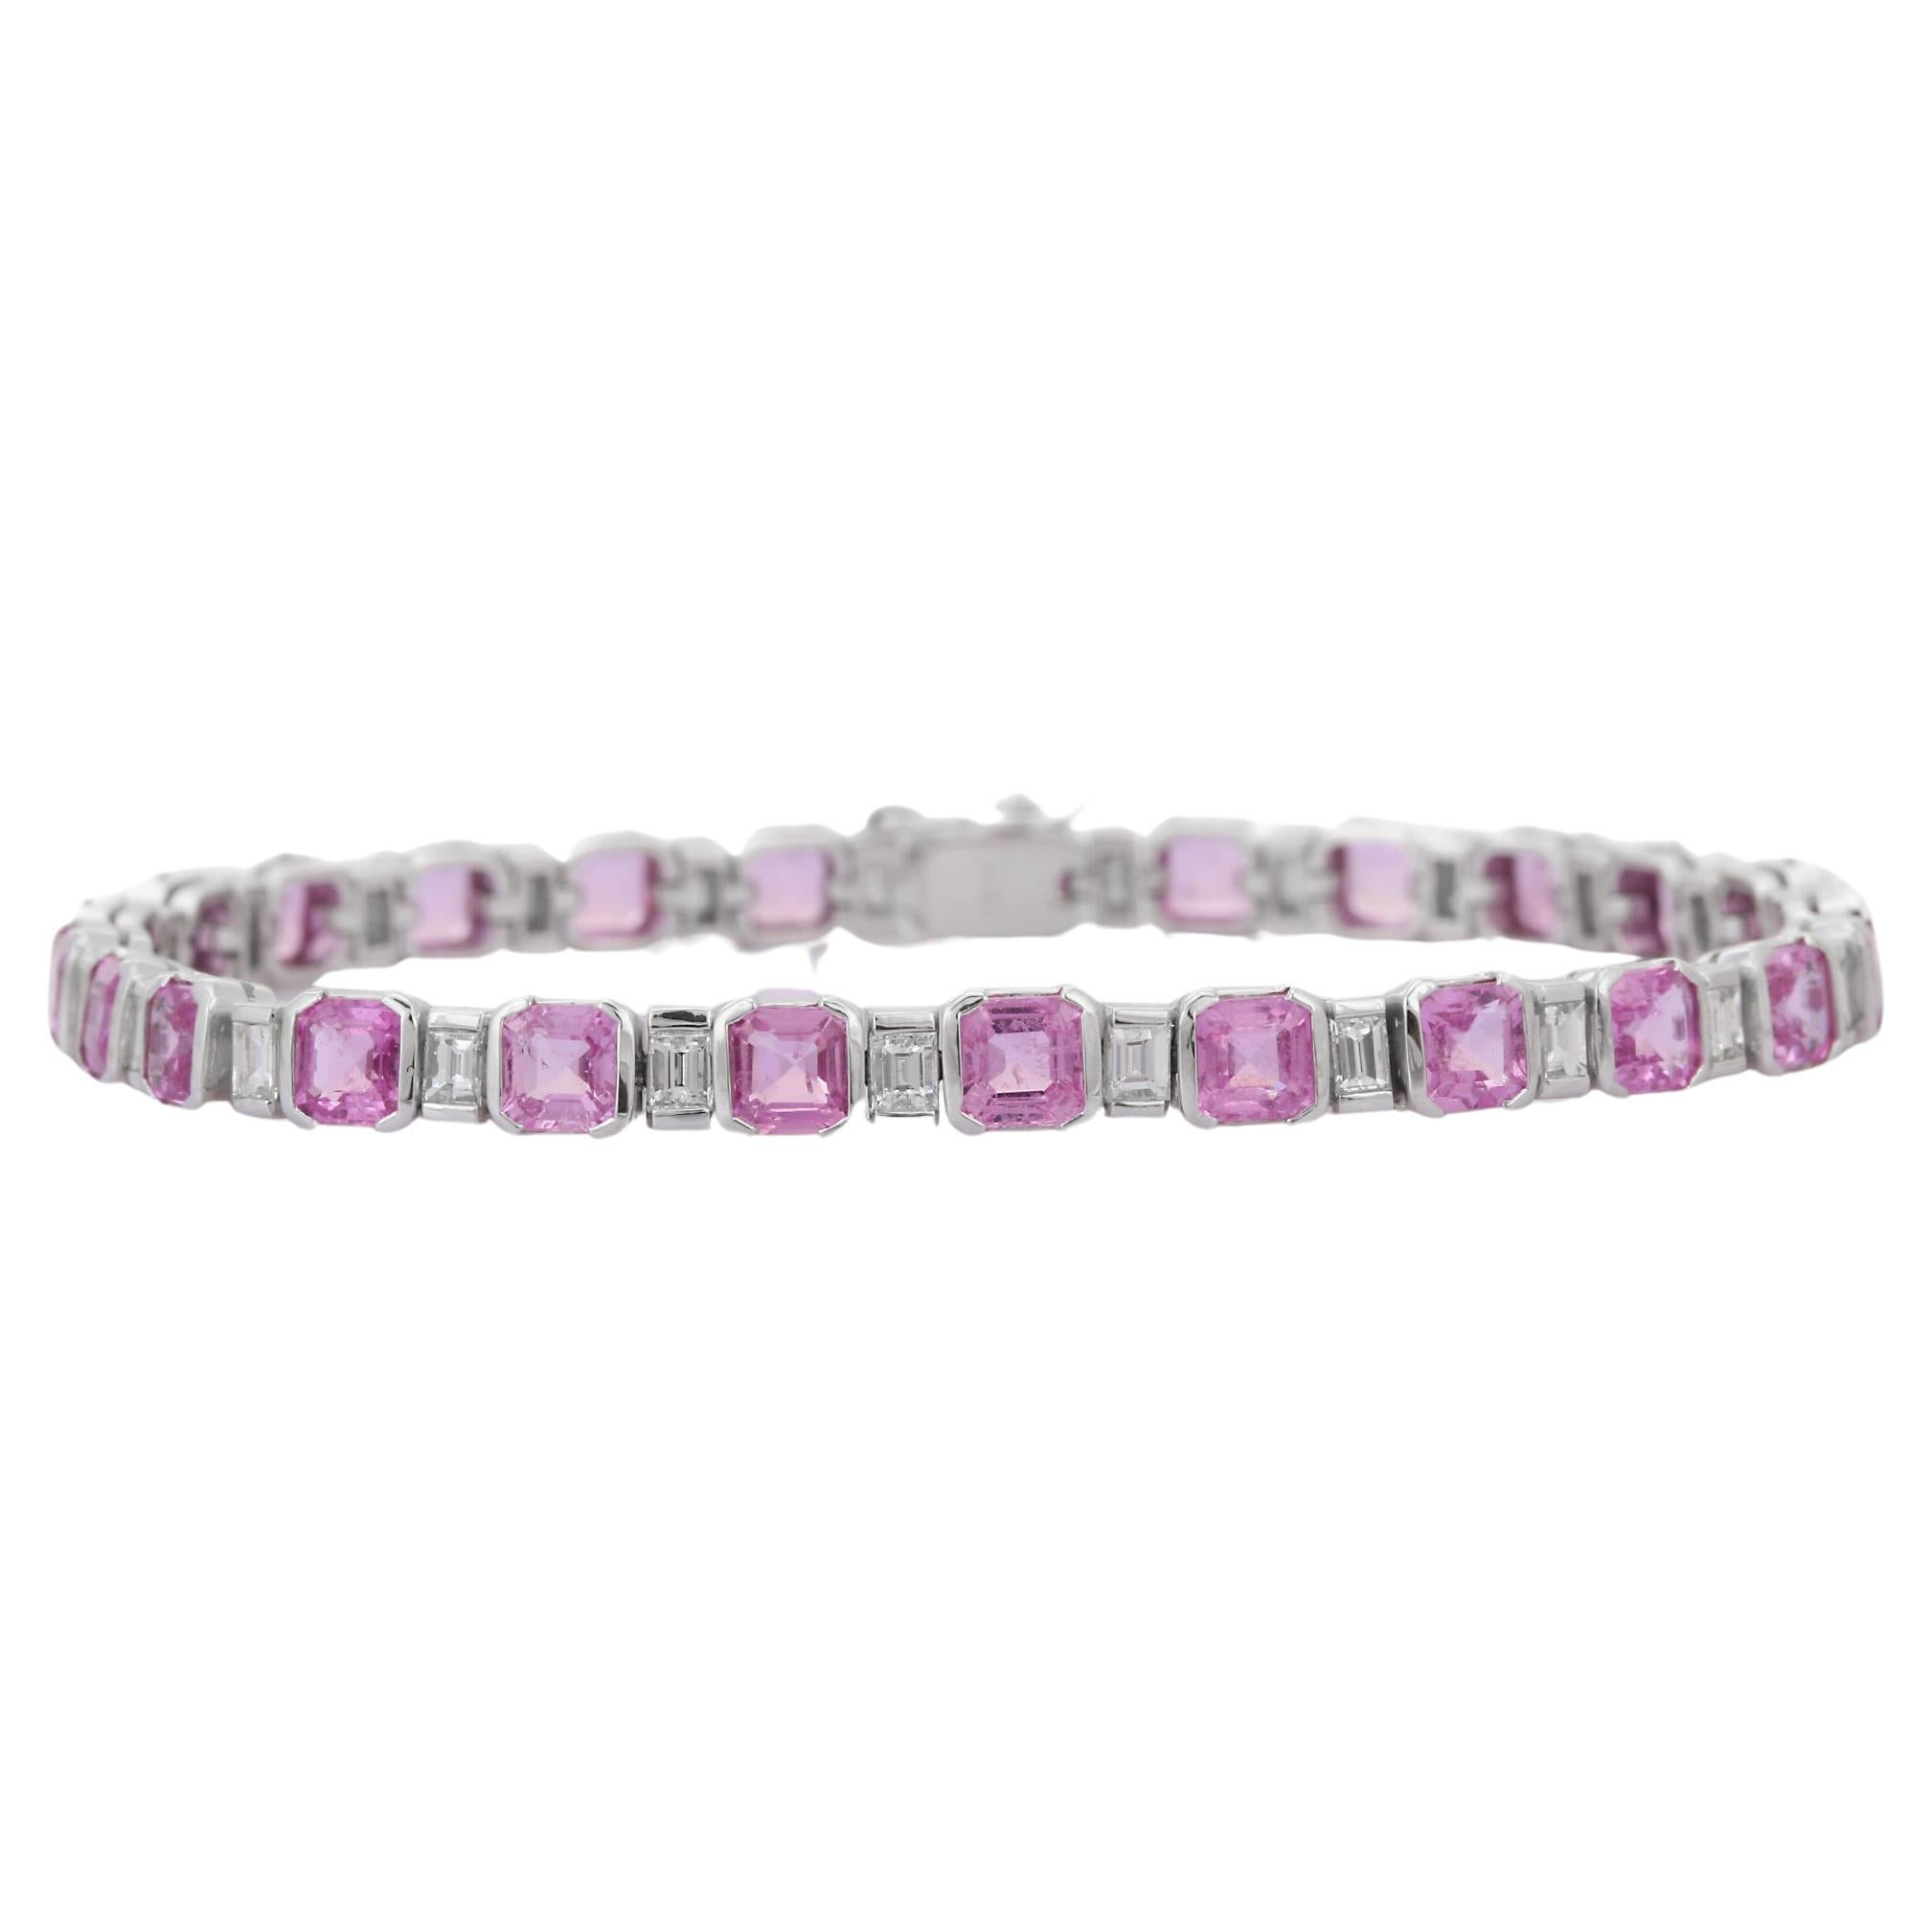 9.82 Carat Natural Pink Sapphire and Diamond Tennis Bracelet in 18K White Gold 